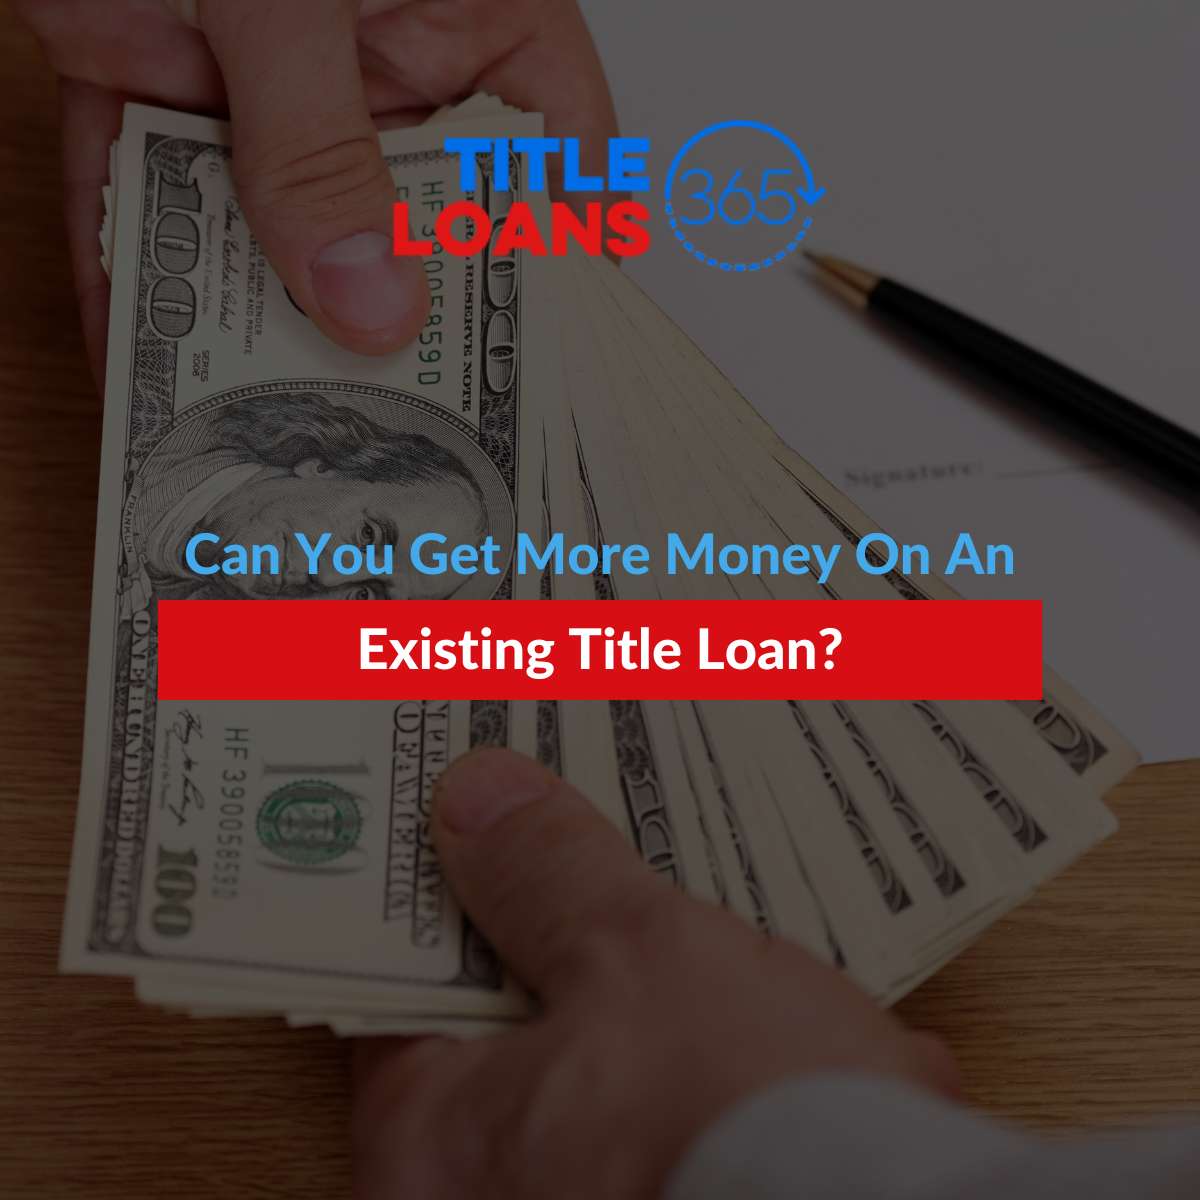 Can You Get More Money On An Existing Title Loan?